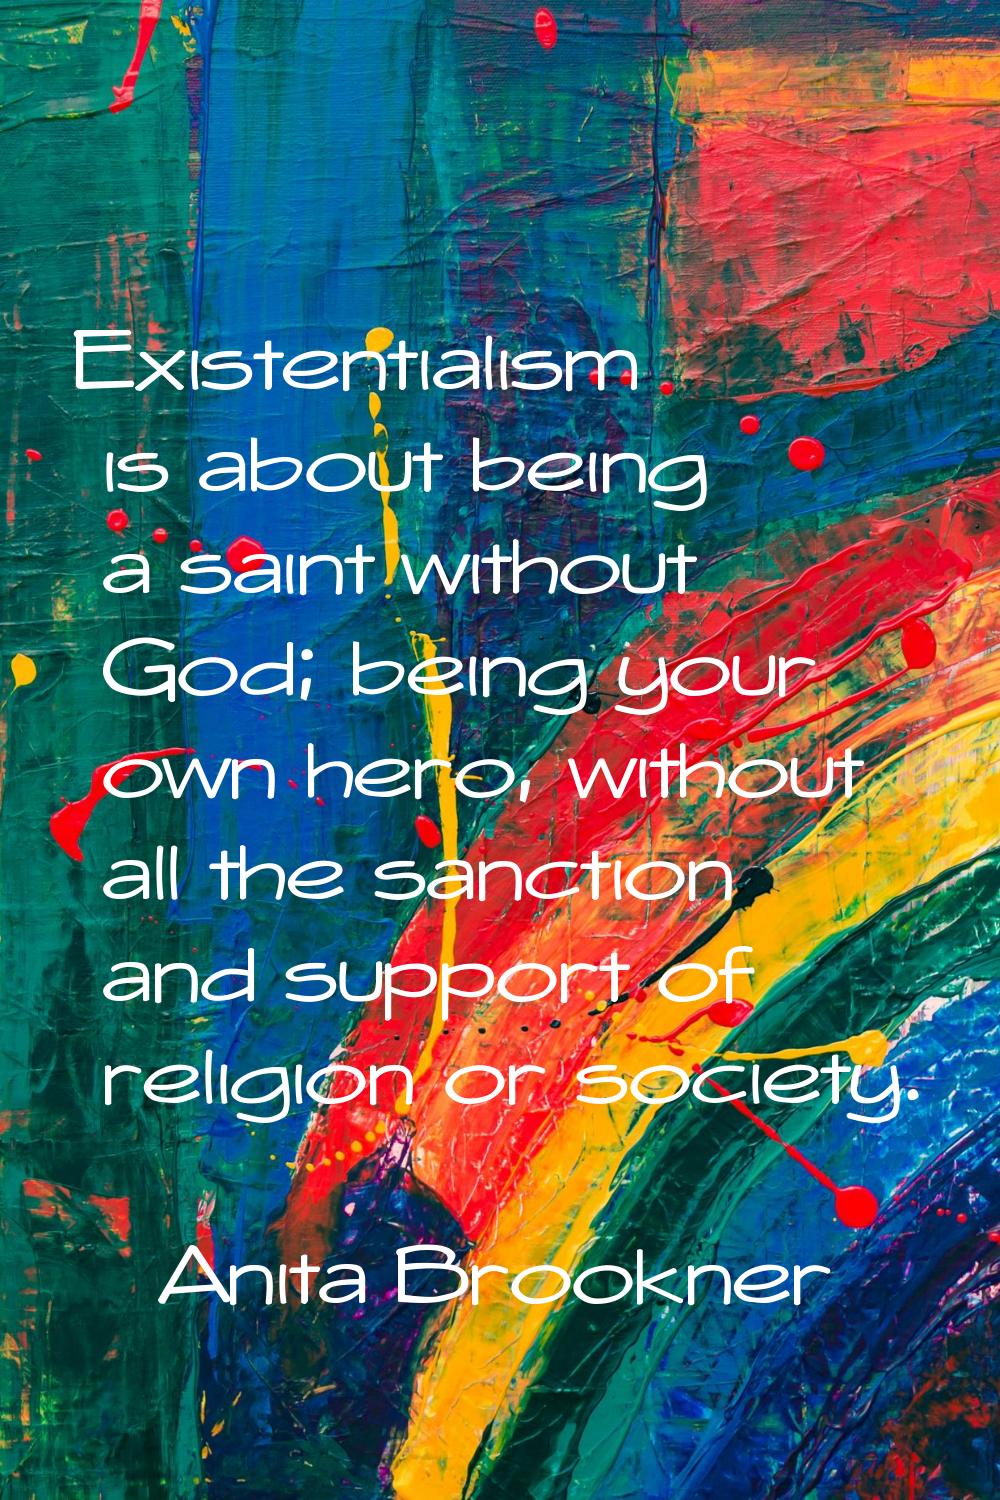 Existentialism is about being a saint without God; being your own hero, without all the sanction an